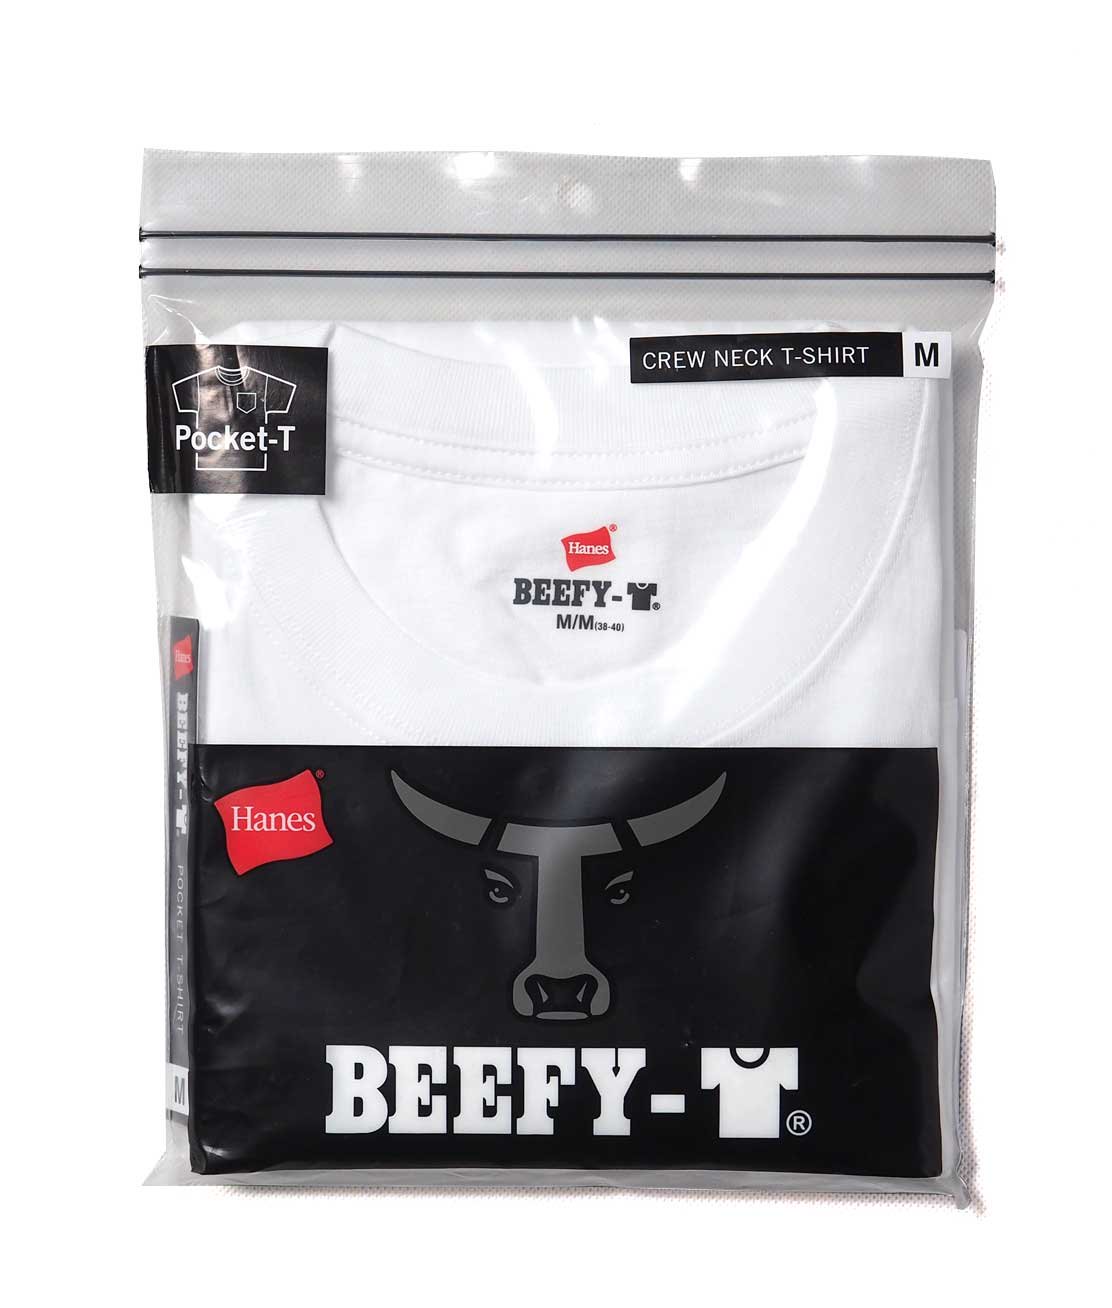 Hanes】H5190 BEEFY POCKET TEE - WHITE ビーフィー ポケット Tシャツ 6.1オンス 厚手 - HUNKY DORY